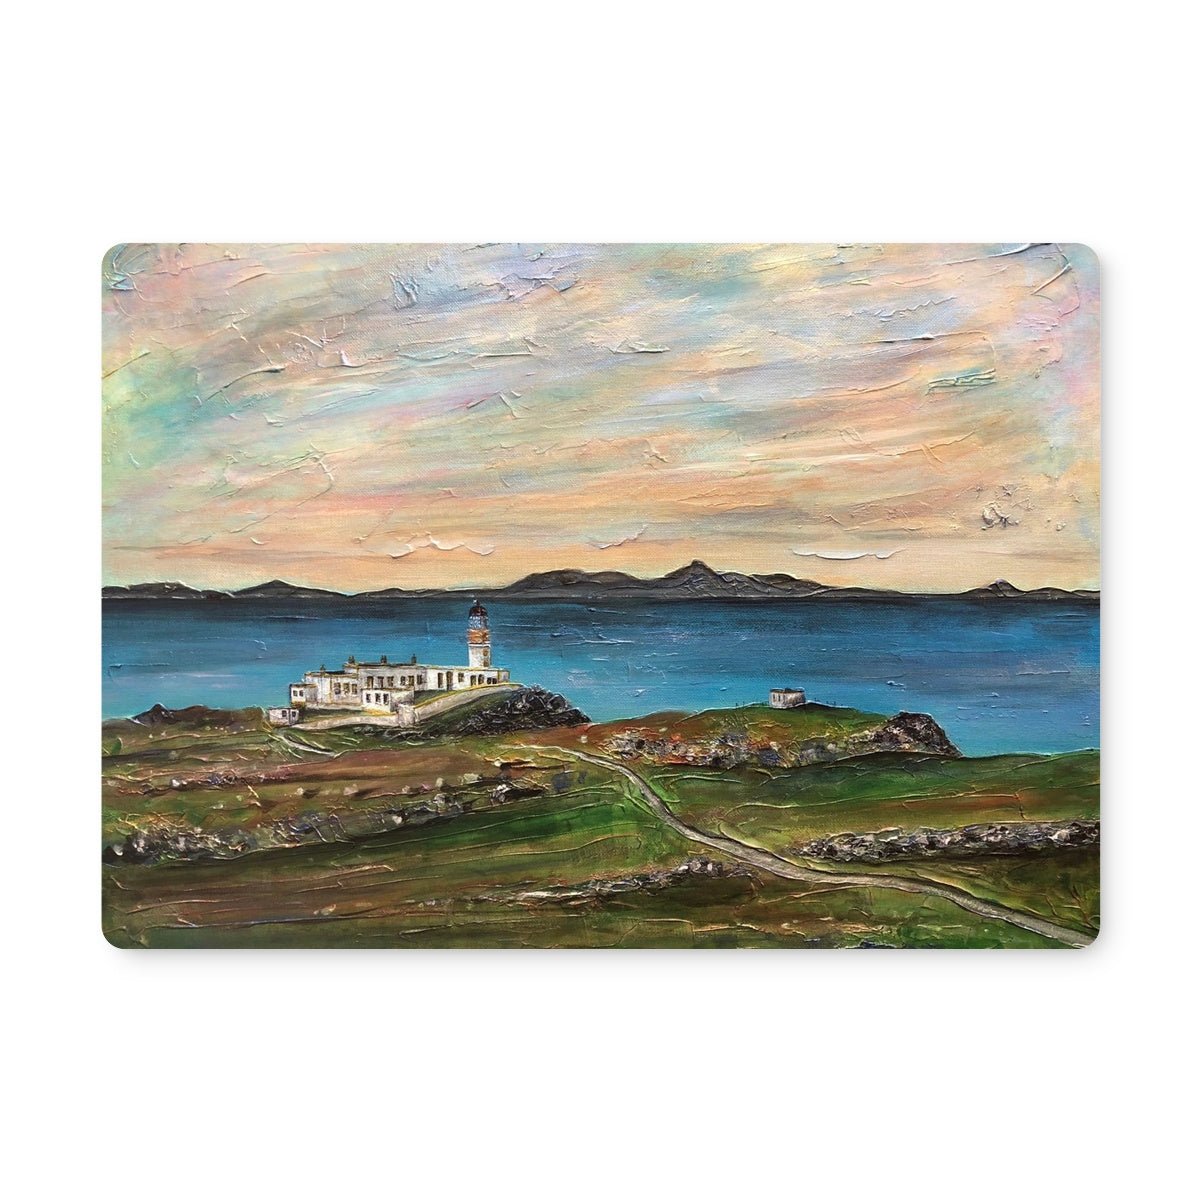 Neist Point Skye Art Gifts Placemat-Placemats-Skye Art Gallery-6 Placemats-Paintings, Prints, Homeware, Art Gifts From Scotland By Scottish Artist Kevin Hunter